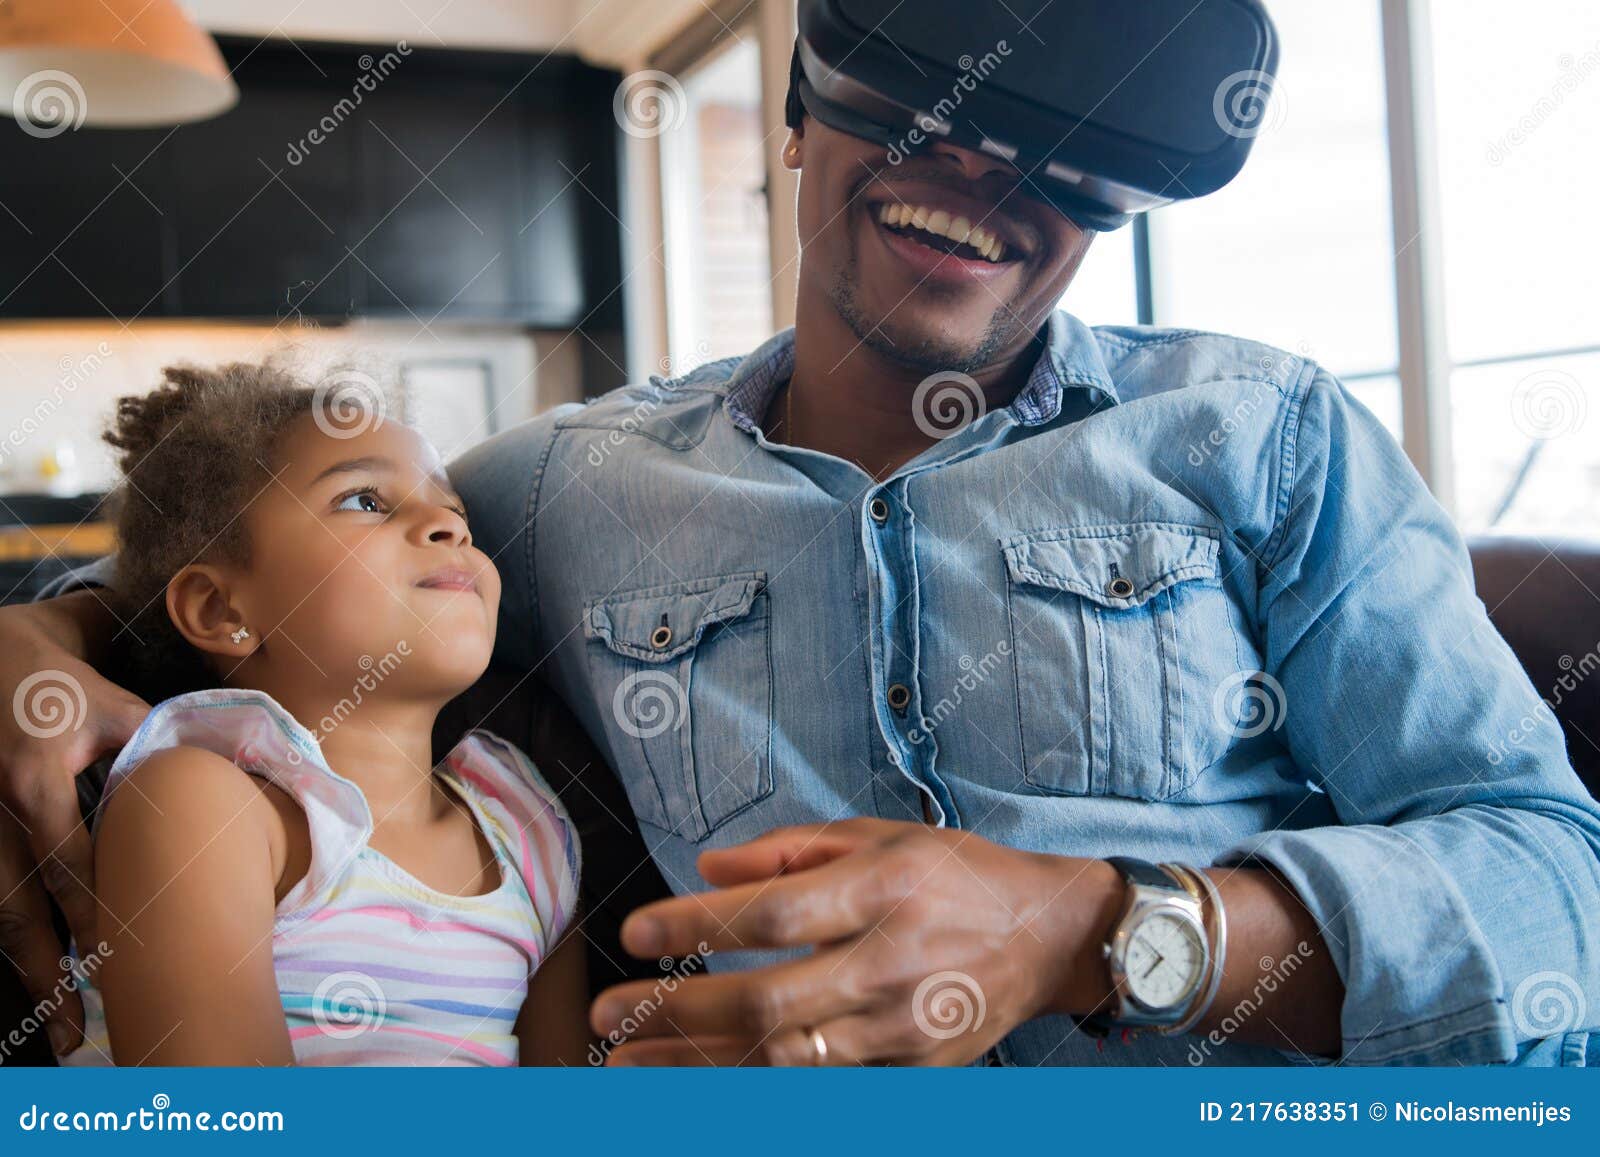 father and daughter playing video games.